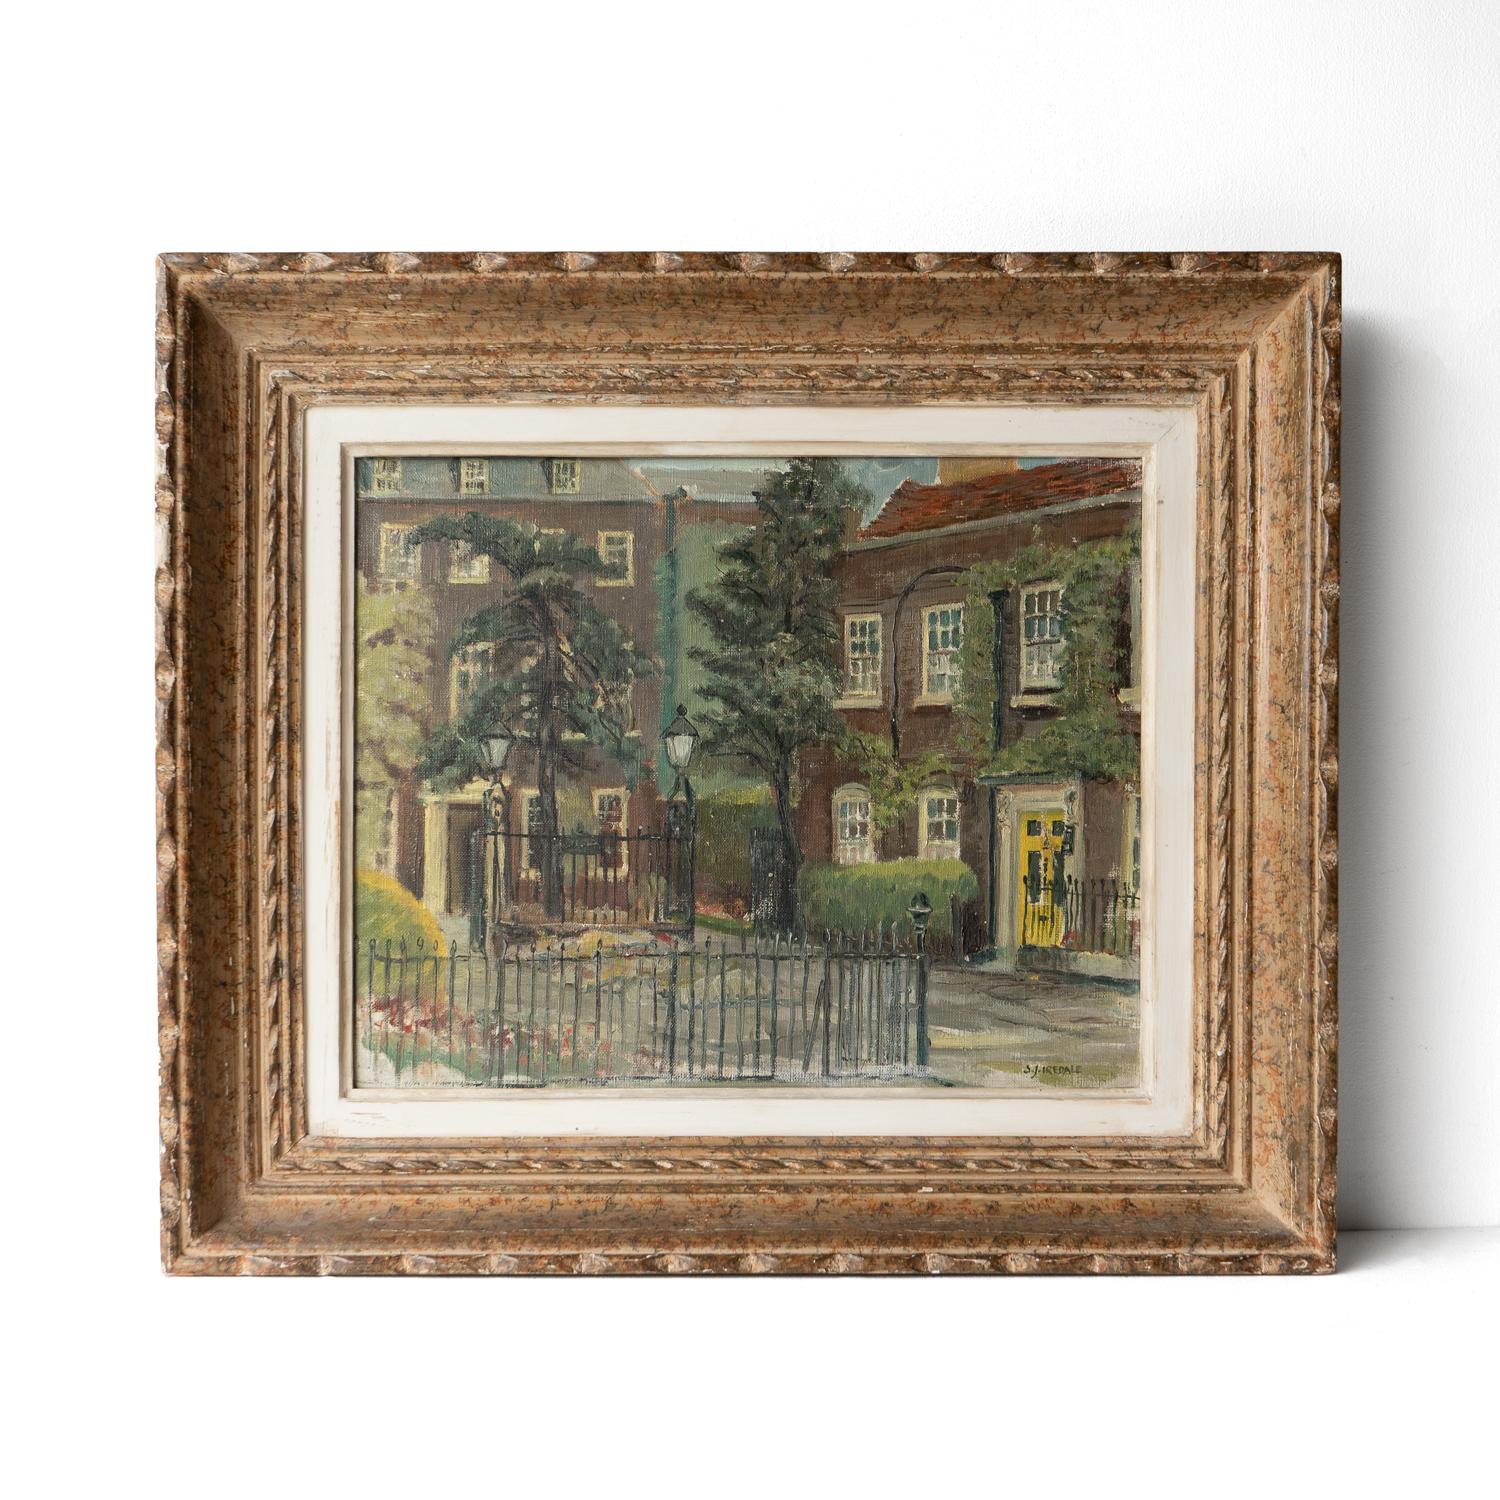 ‘BOSTON HOUSE, CHISWICK SQUARE, LONDON’, ORIGINAL OIL ON CANVAS PAINTING BY SYDNEY JOSEPH IREDALE (1896-1967)
Depicting an evocative scene of a leafy London square with grey brick houses and iron gates.

Painted in a loose, familiar style expertly